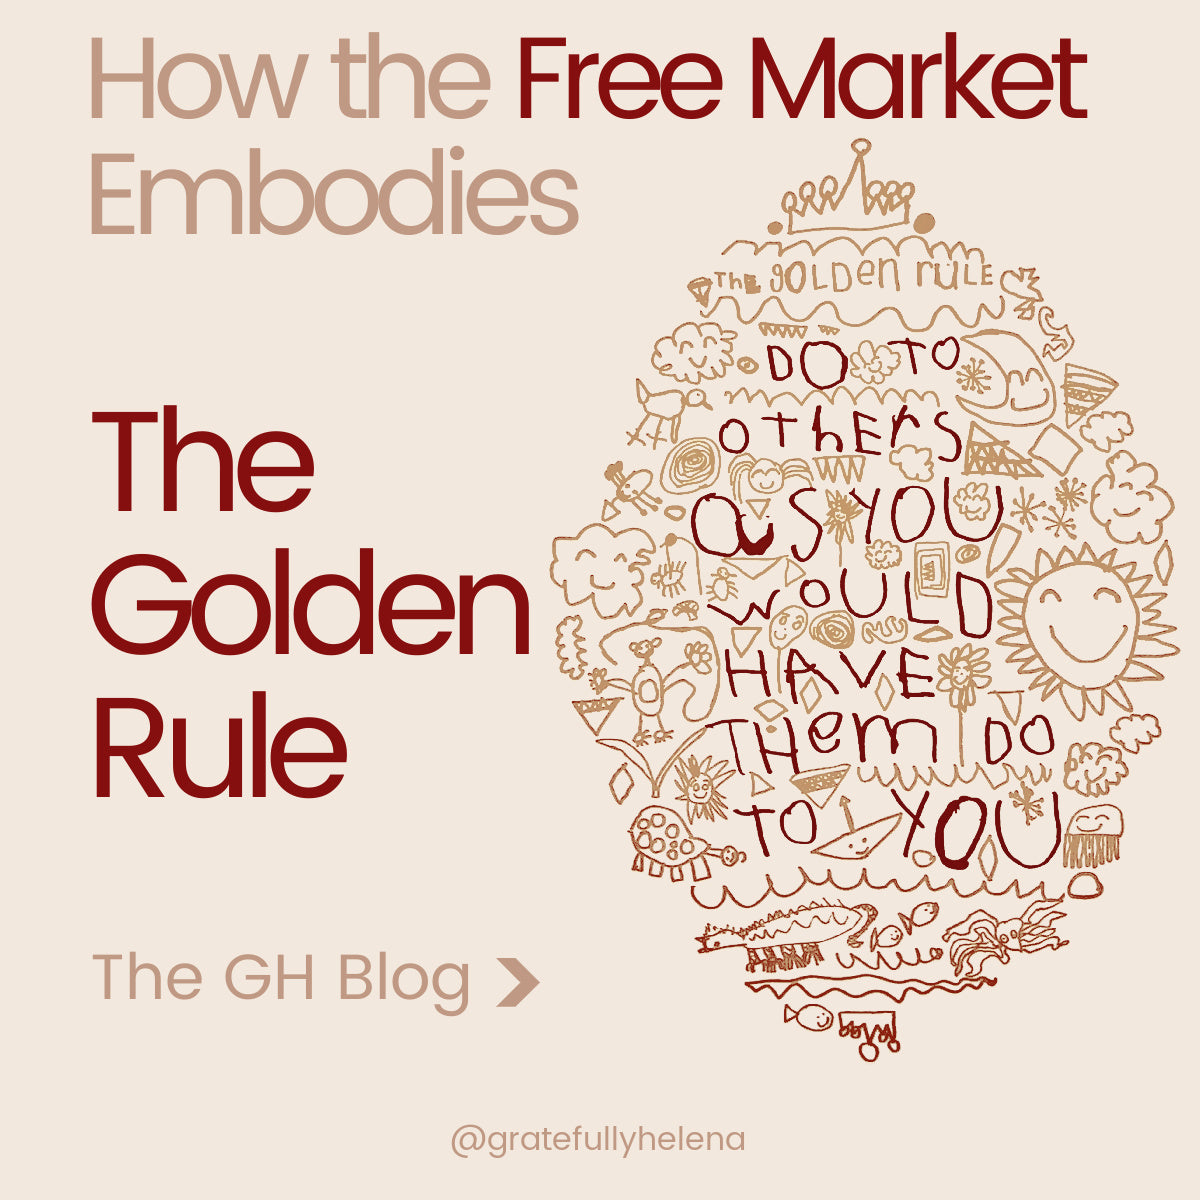 HOW THE FREE MARKET EMBODIES THE GOLDEN RULE